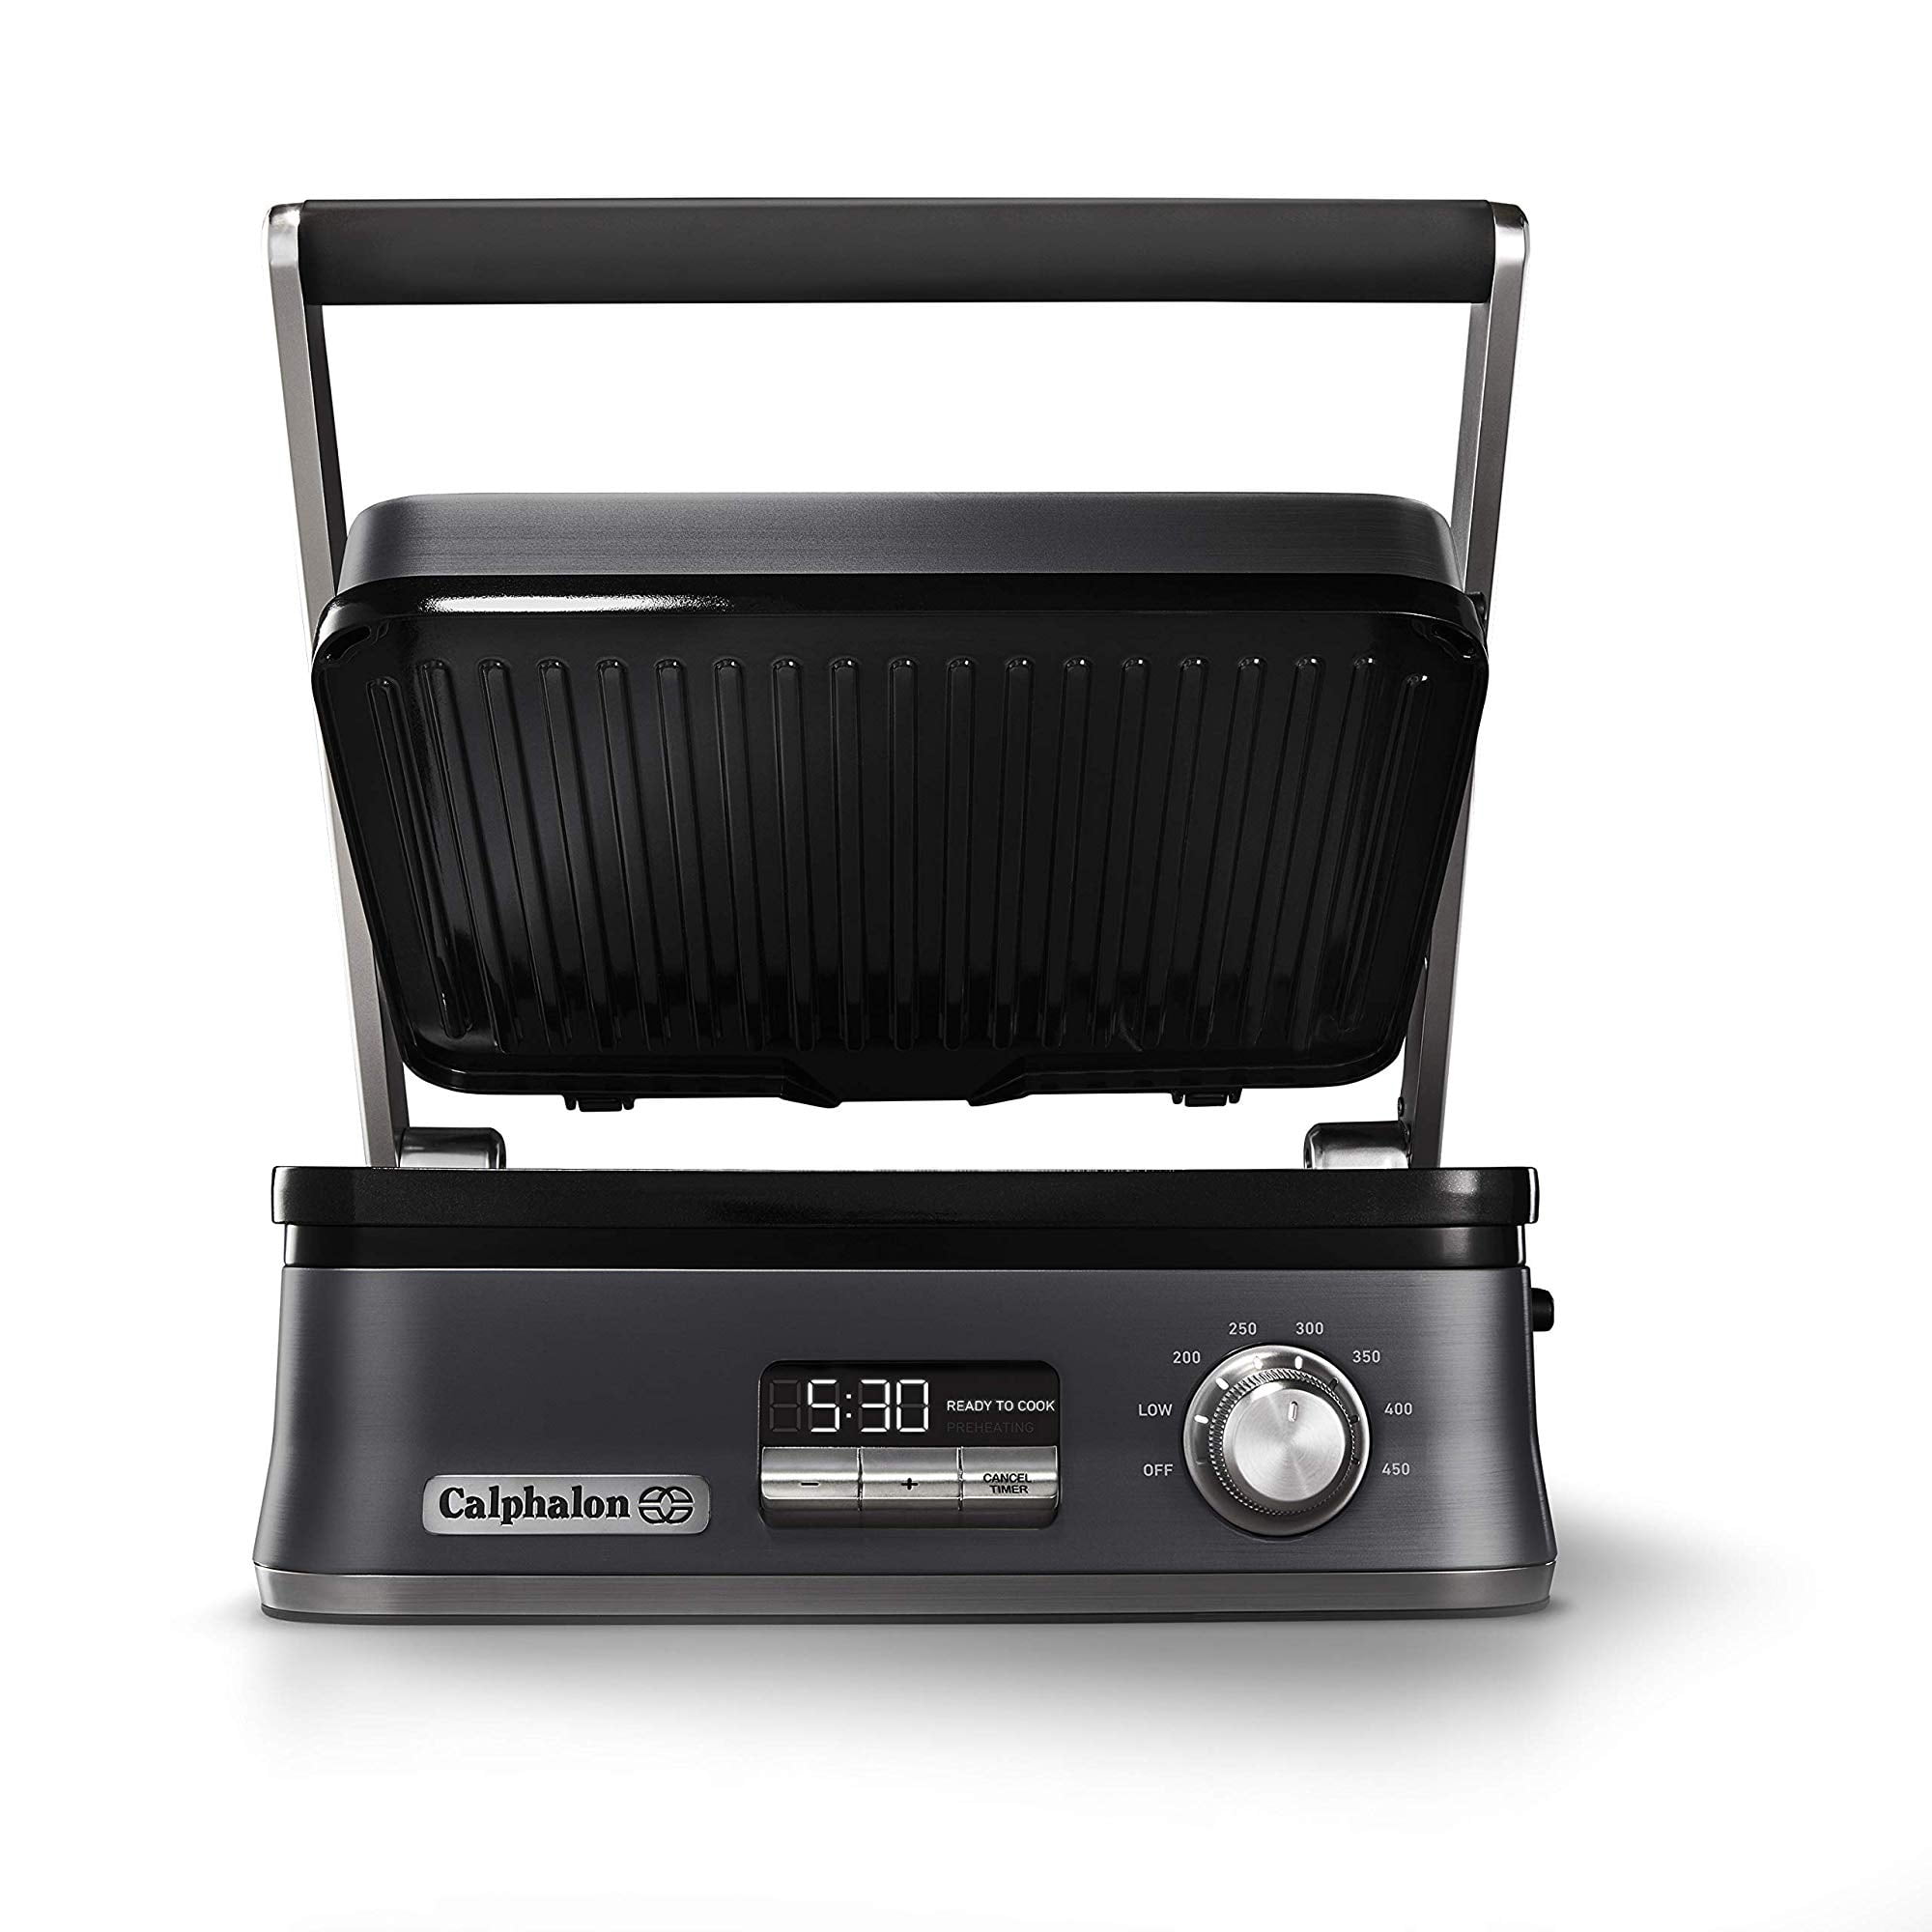 Best Buy: T-Fal OPTIGRILL+ Electric Grill Stainless steel/Black GC712D54